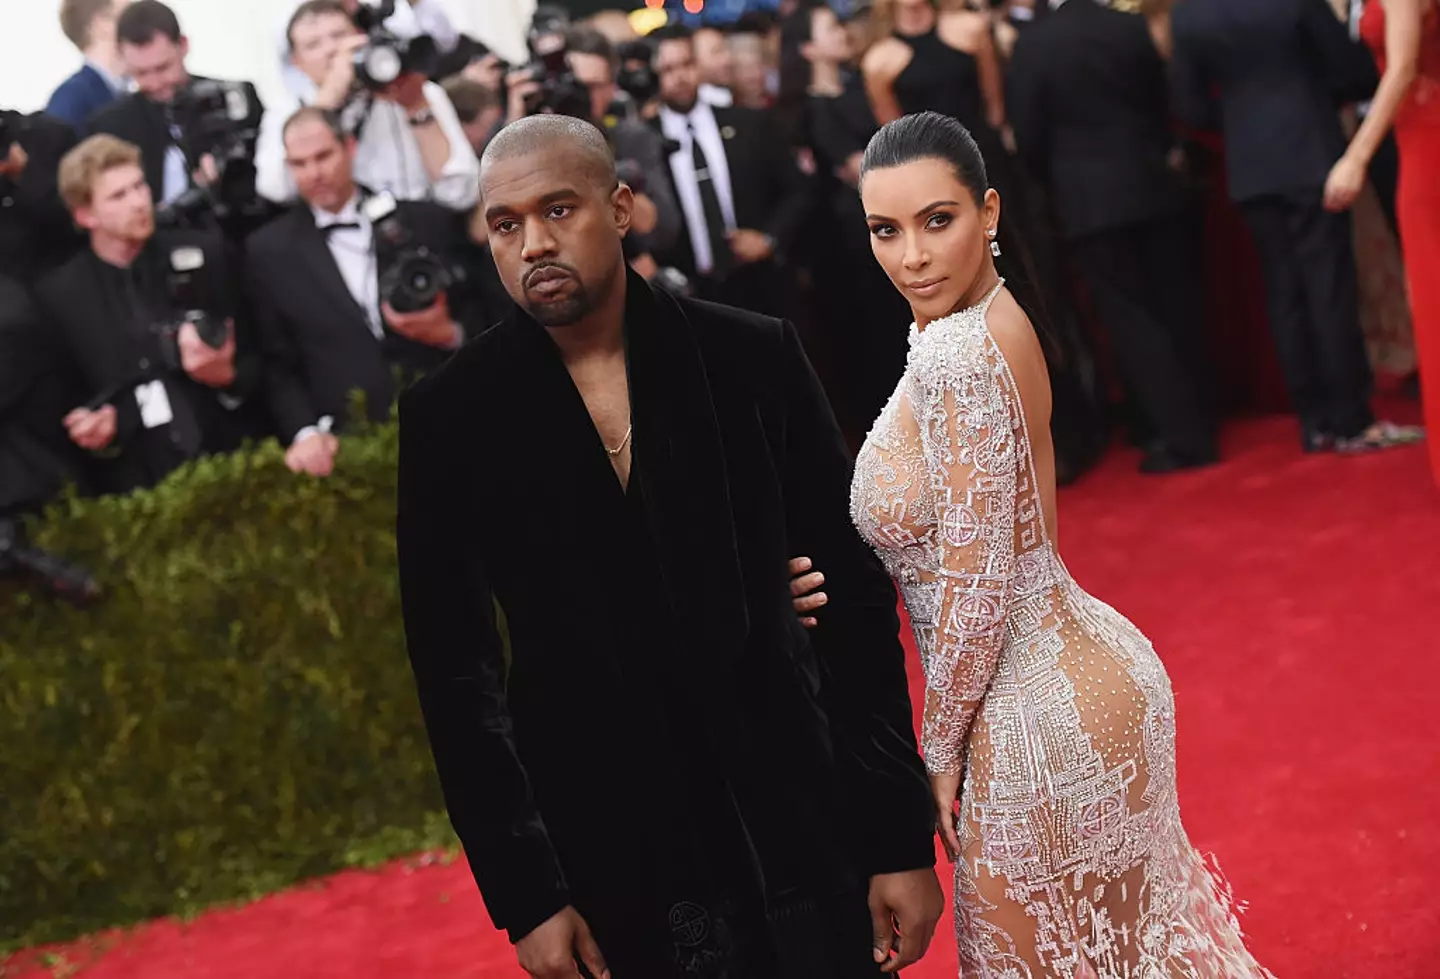 Kim was married to rapper Kanye West for six years.